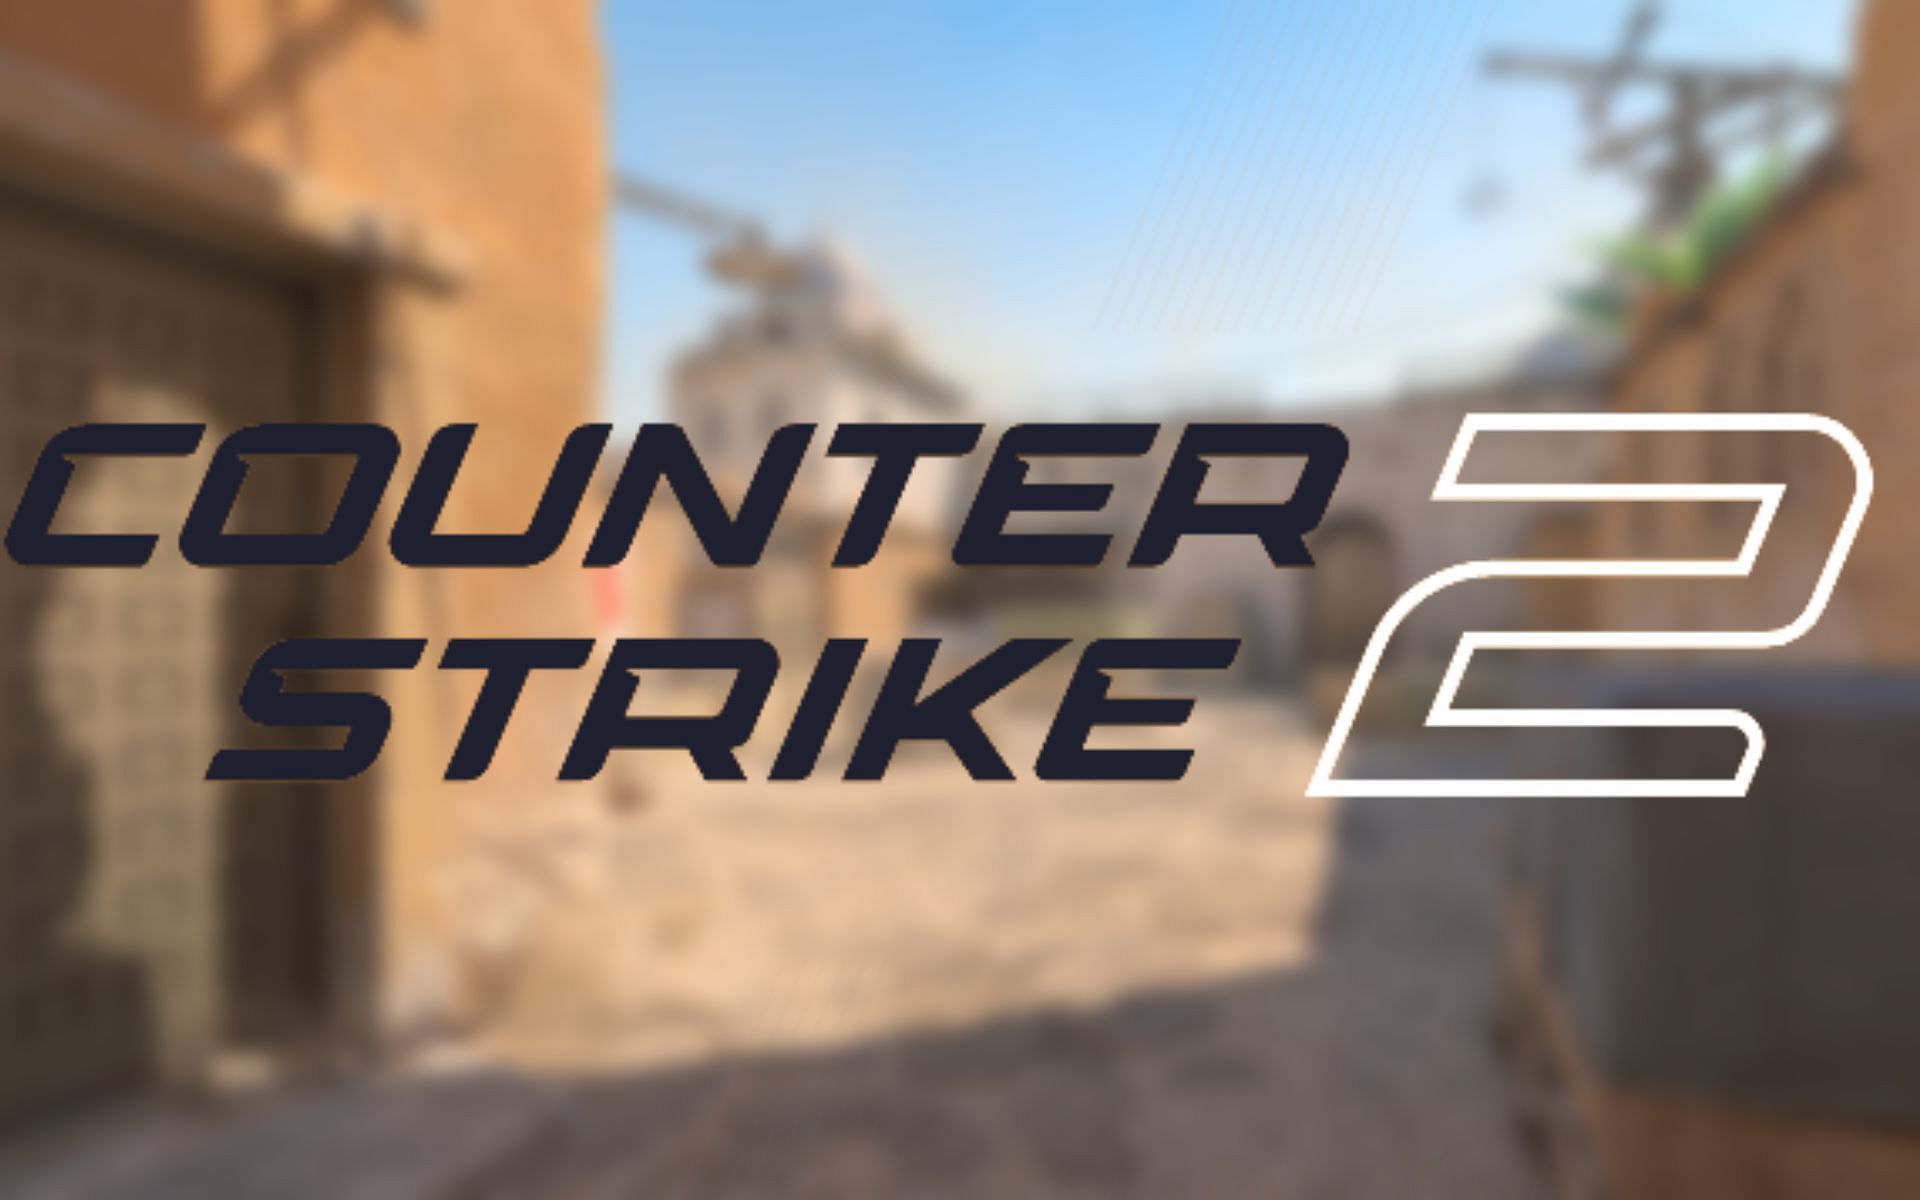 Steam Community :: Guide :: Console Commands of Counter-Strike 1.6